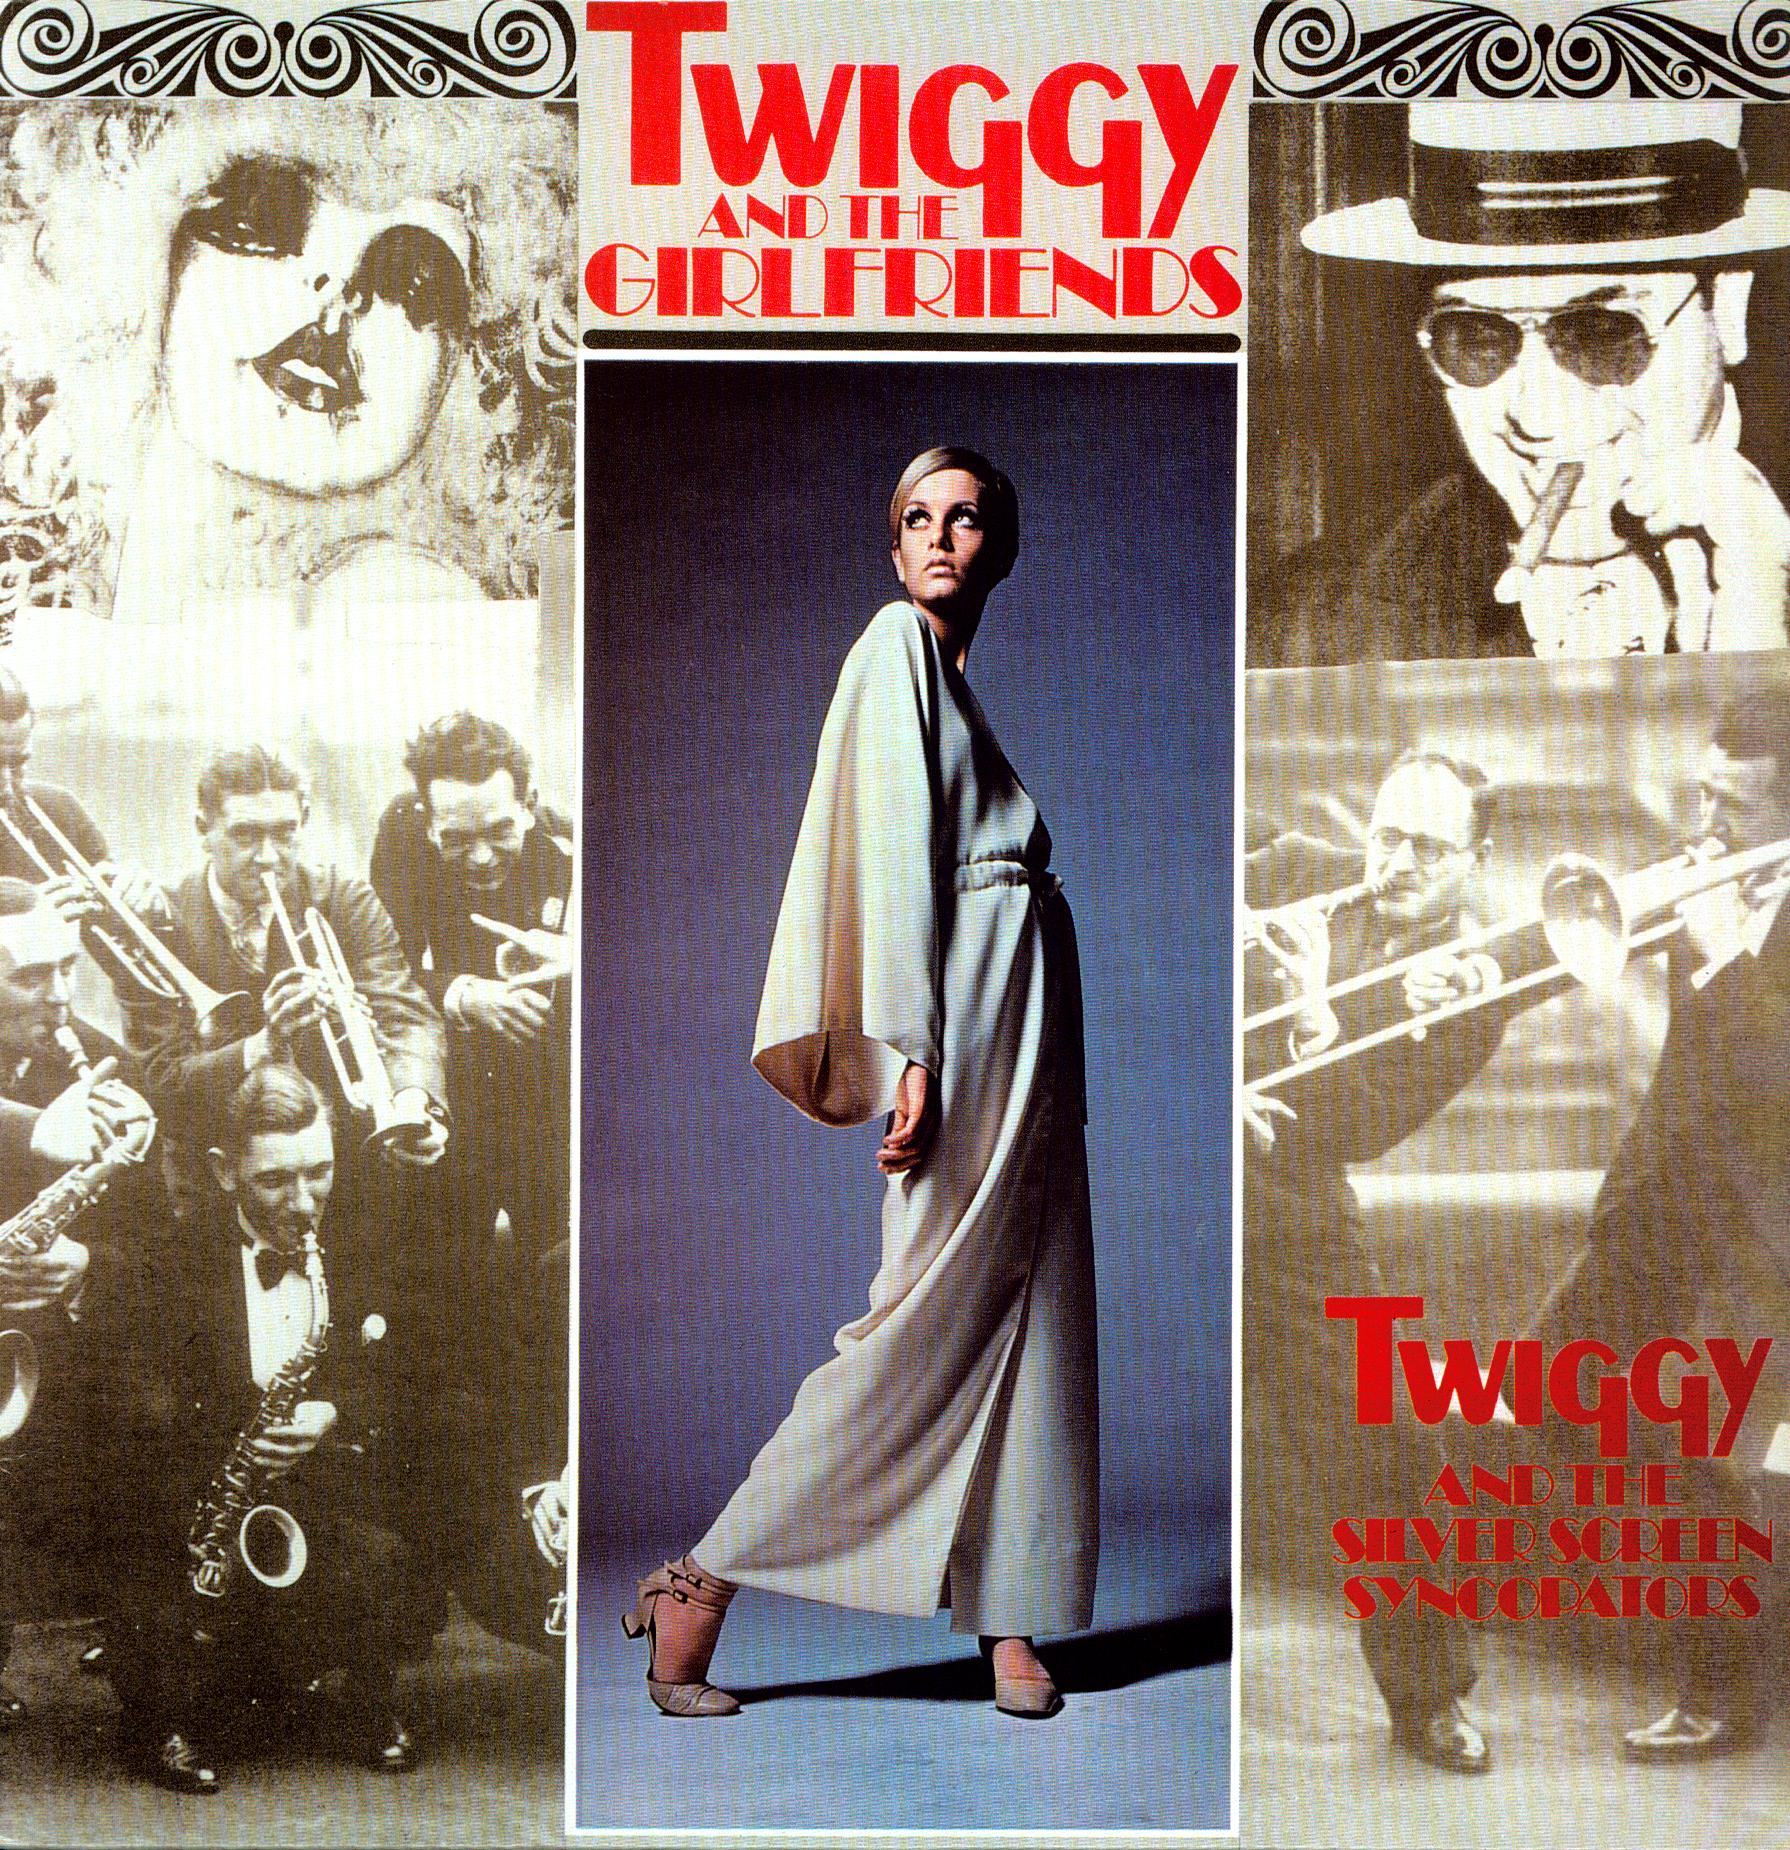 TWIGGY & THE SILVER SCREEN SYNCOPAT (FRA)